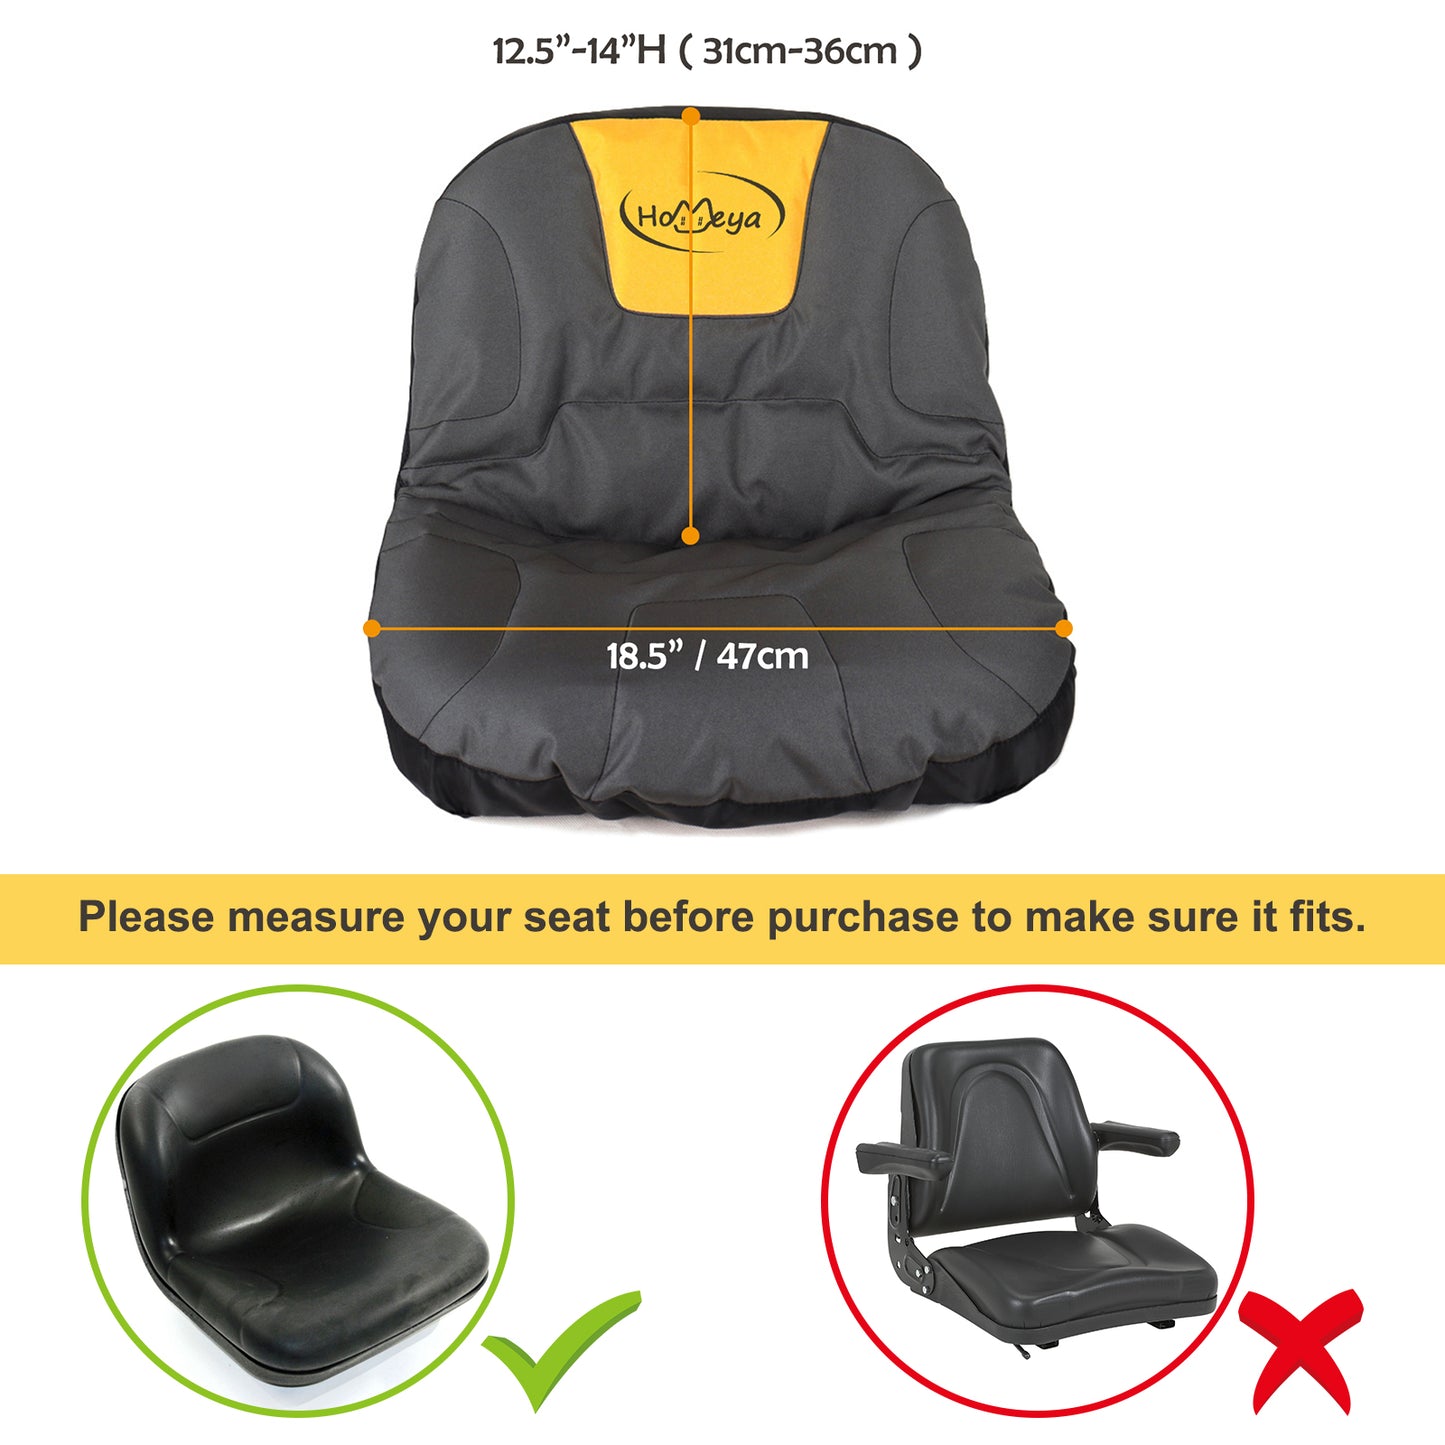 Riding Lawn Mower Seat Cover, Heavy Duty 600D Polyester Oxford Tractor Seat Cover with Padded Cushion Surface, Durable Waterproof Seat Cover Fits Craftsman,Cub Cadet,Kubota Lawn Mower Tractor